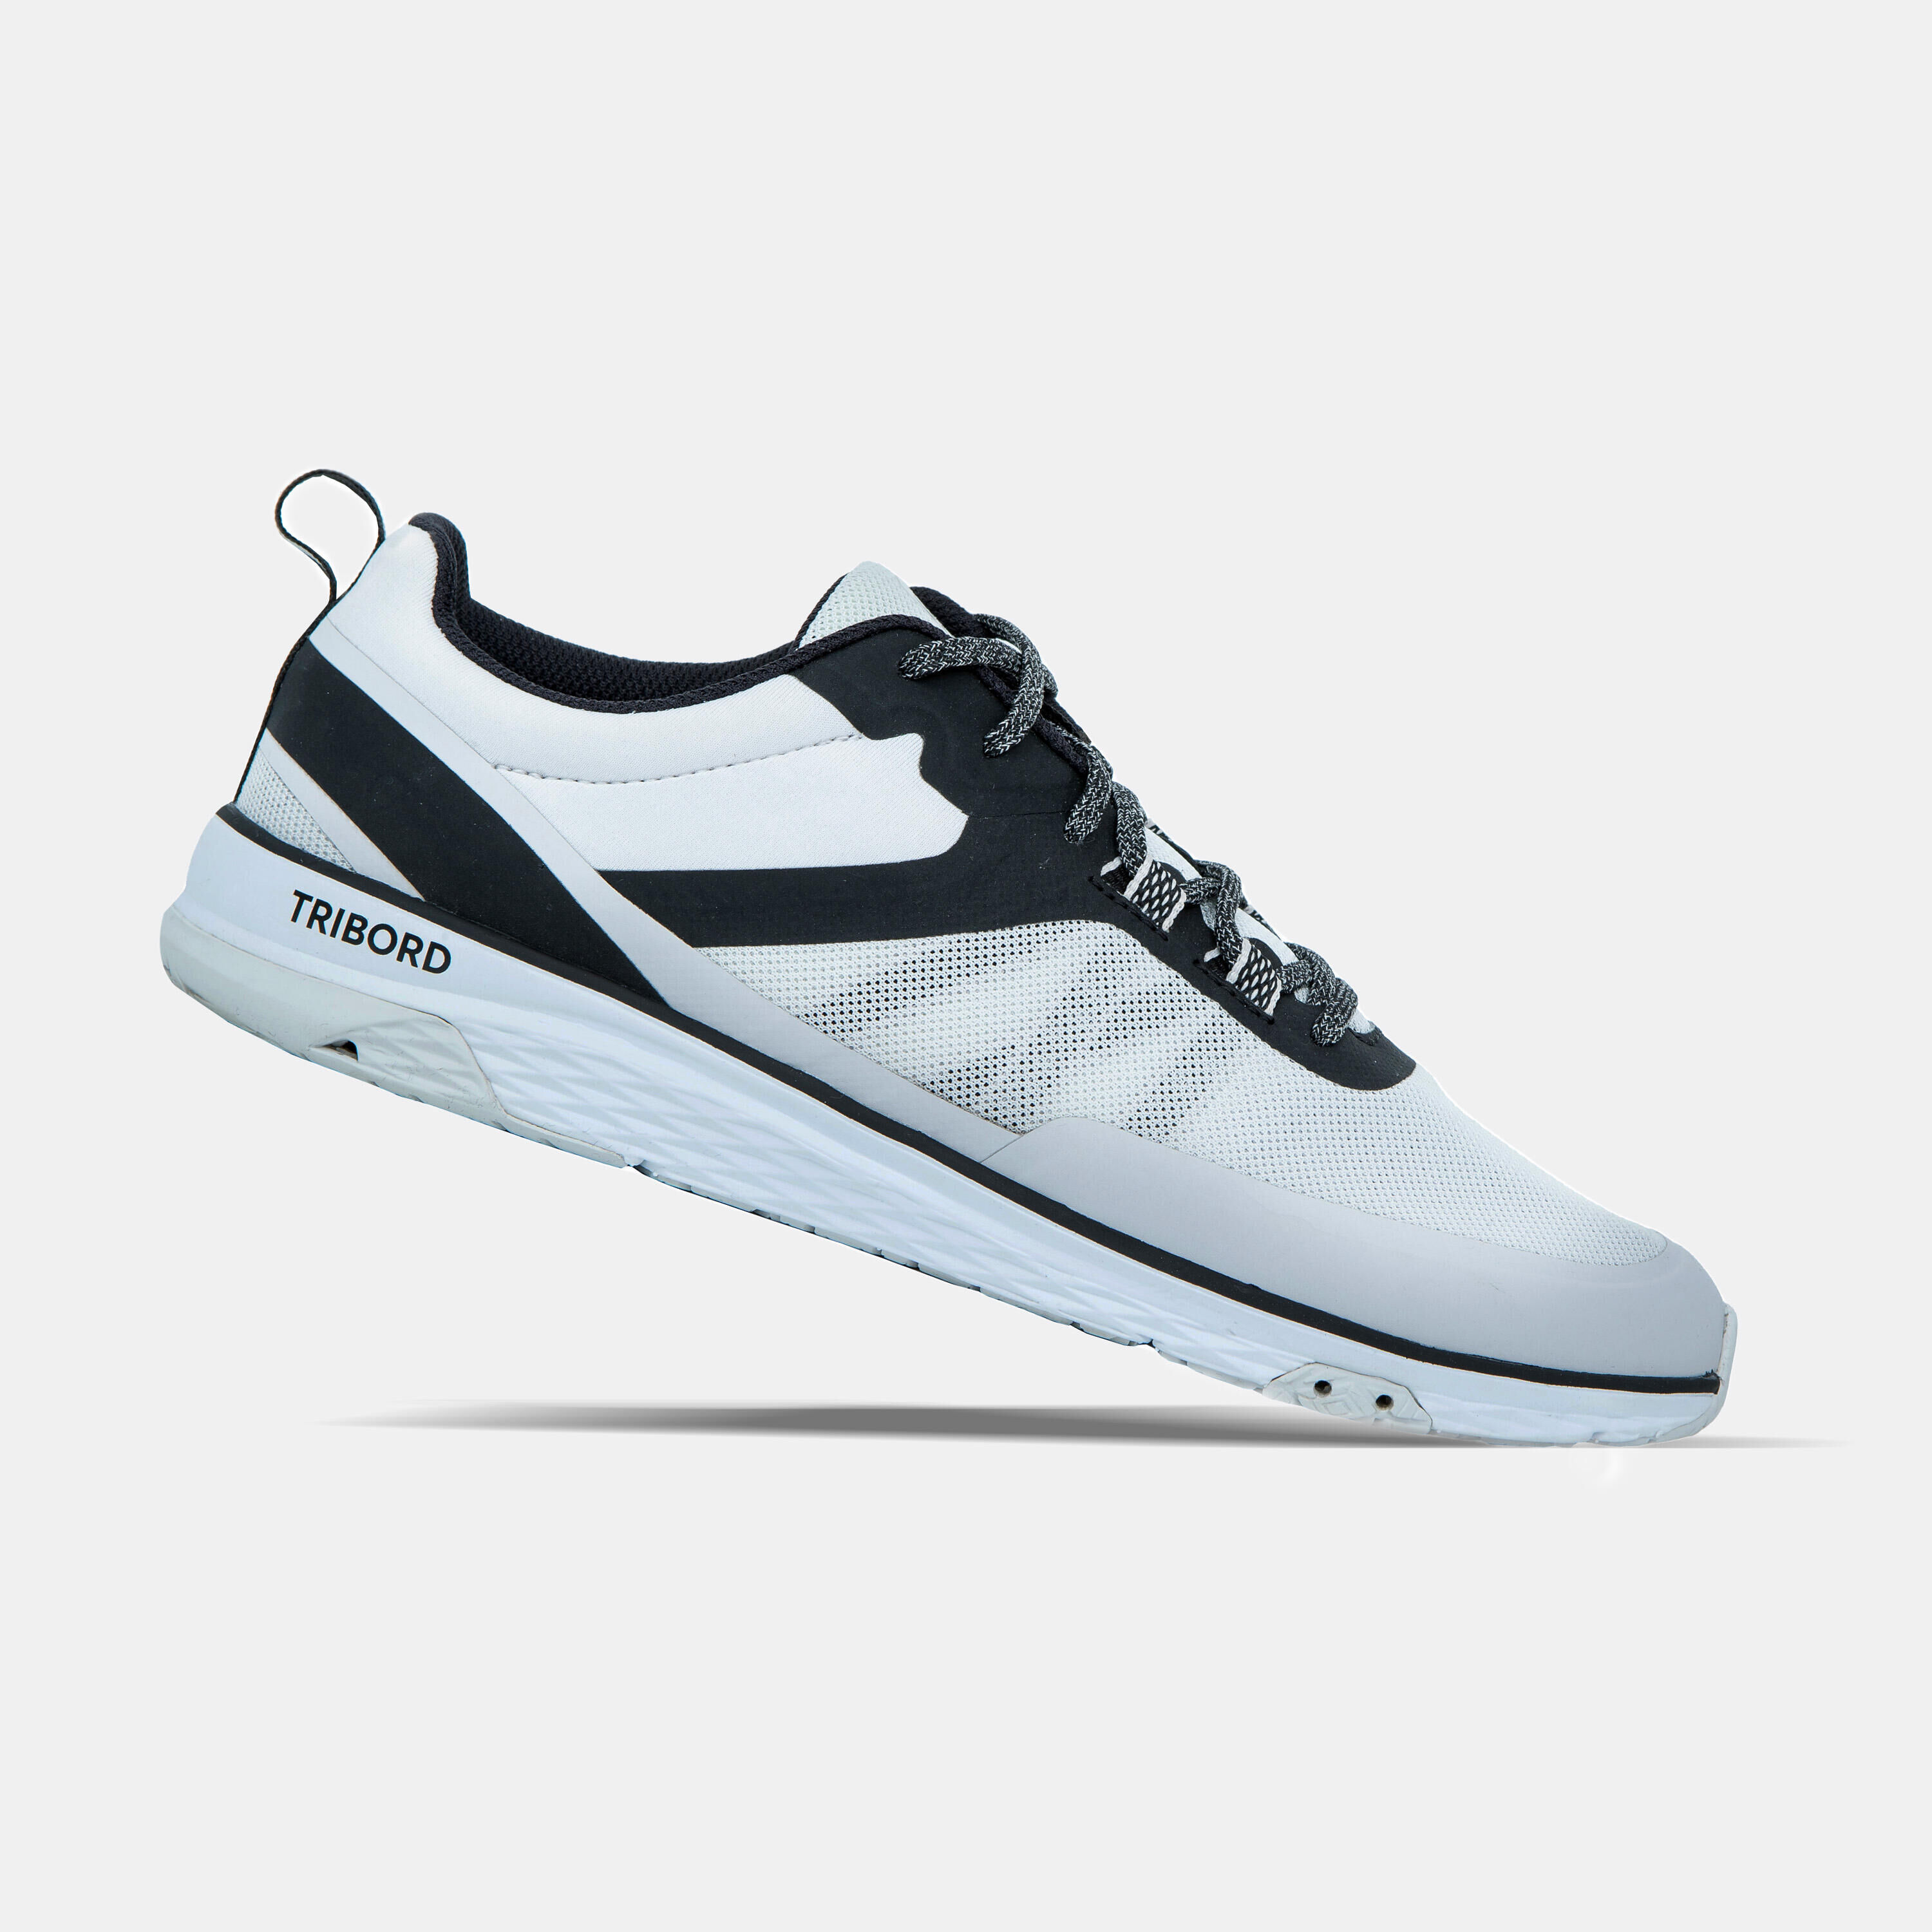 TRIBORD Men’s Sailing Boat Trainers Race - Grey / Black